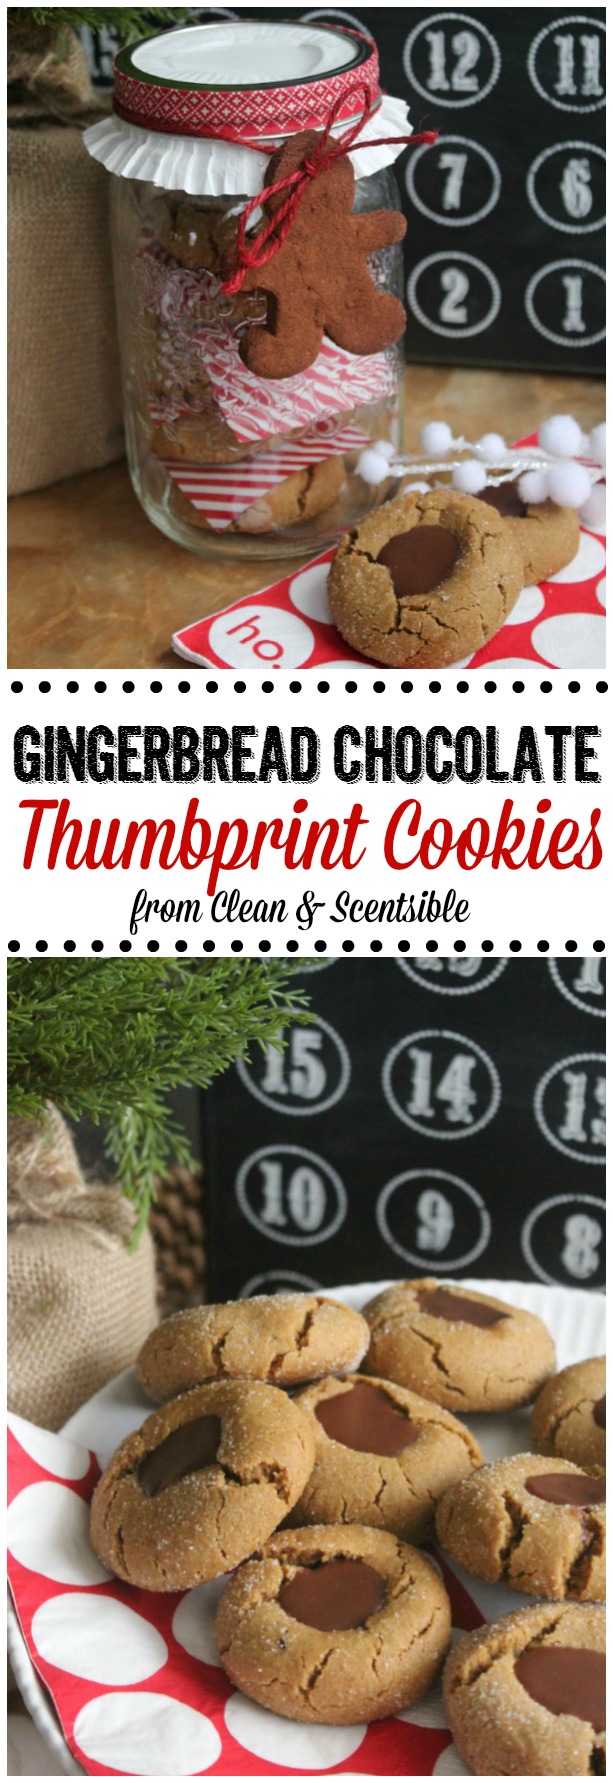 These gingerbread chocolate thumbprint cookies are soft and chewy with just the right hit of chocolate! If you are looking for a new Christmas cookie recipe, this is sure to be a favorite!